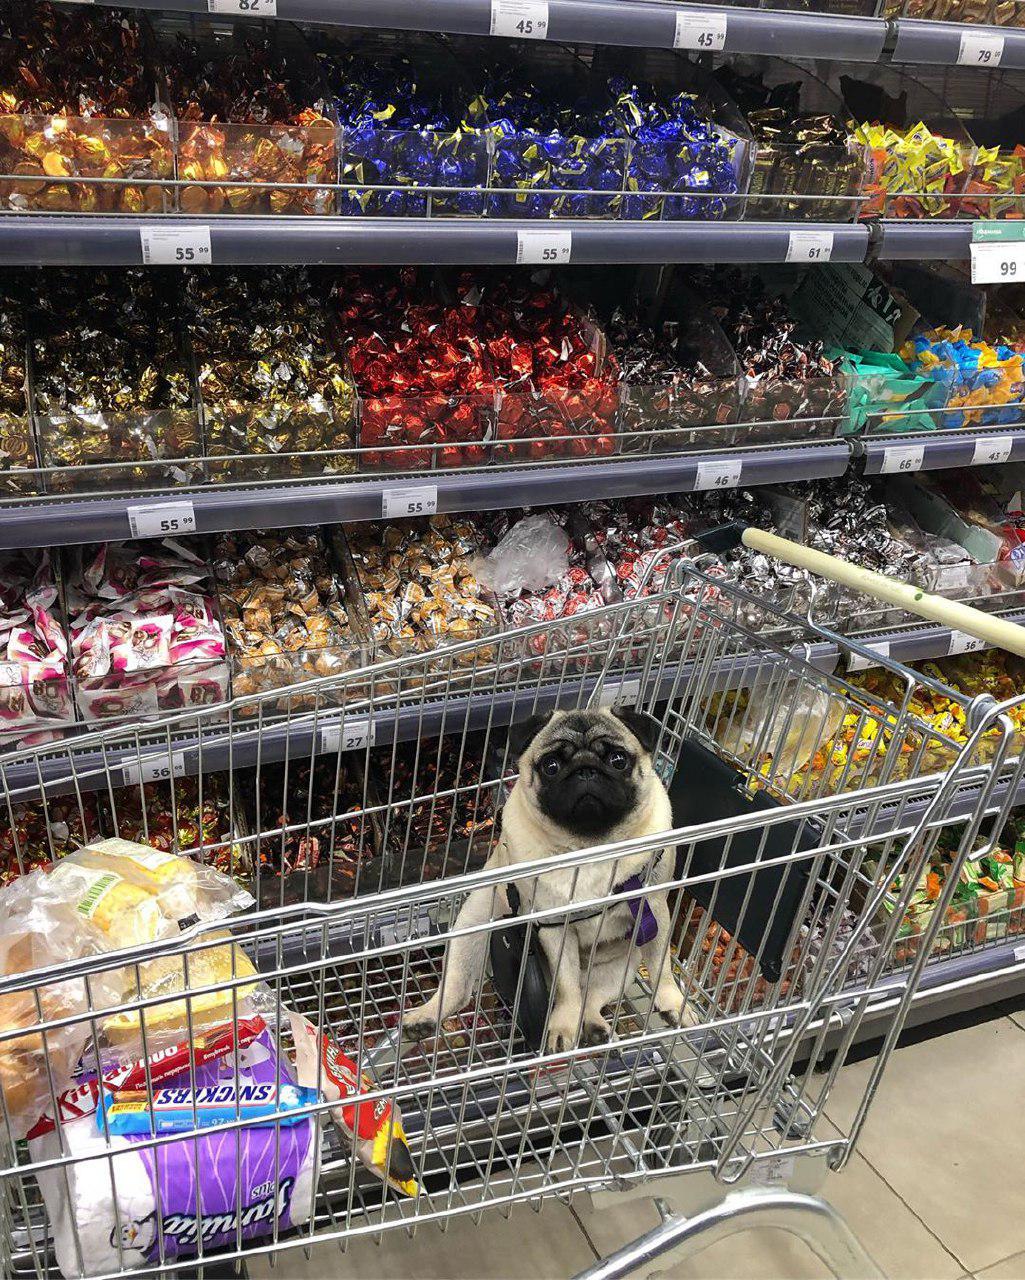 A Pug sitting in a push cart at the grocery store